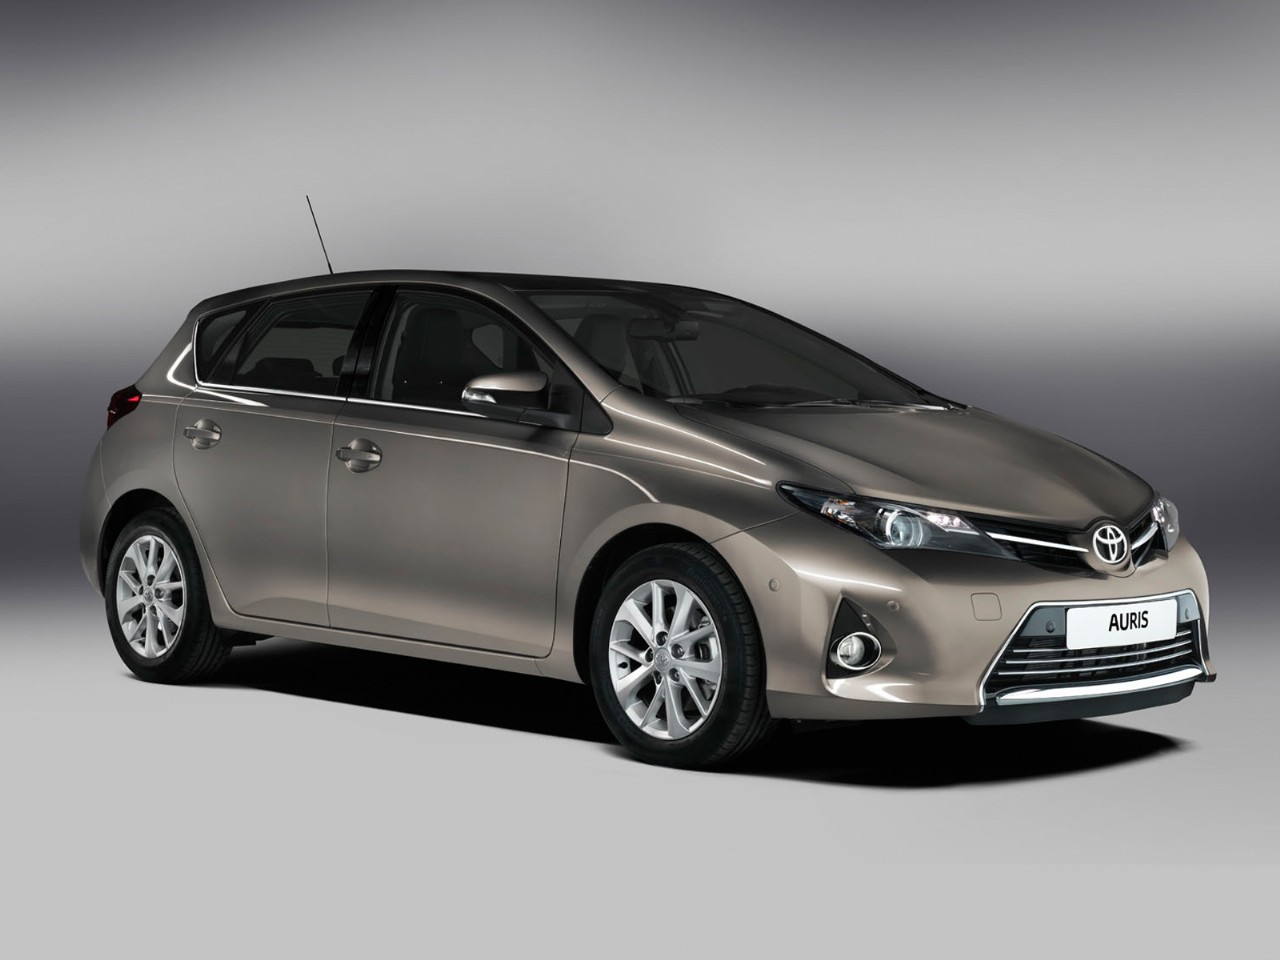 The oil capacity and recommended oil type for the Toyota Auris